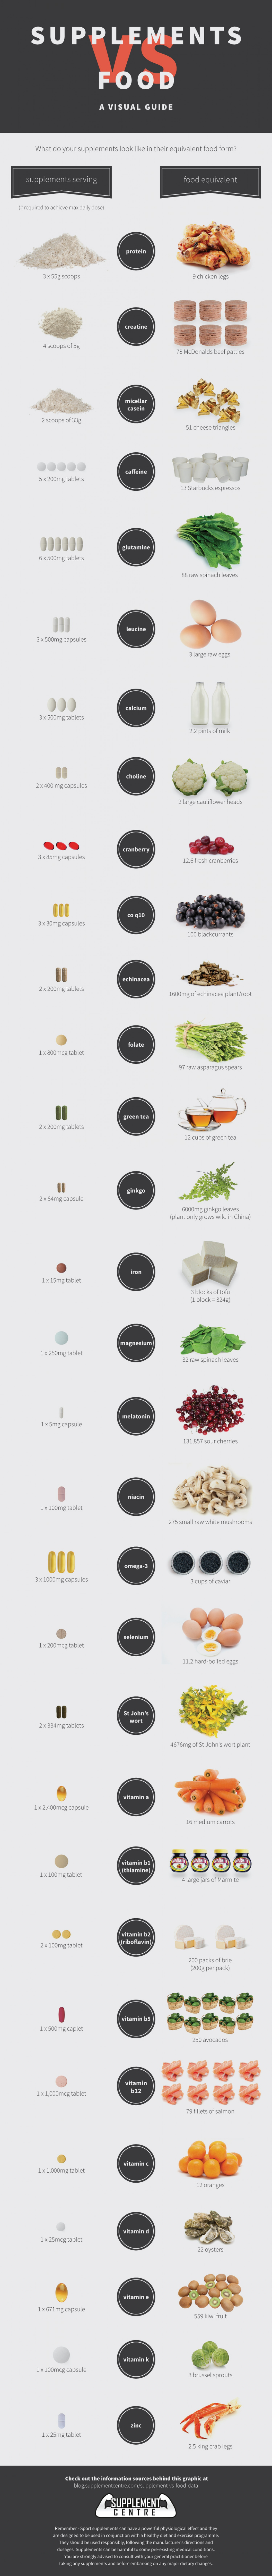 supplements-vs-food--a-visual-guide-infographic_52013223d9eee_w1500